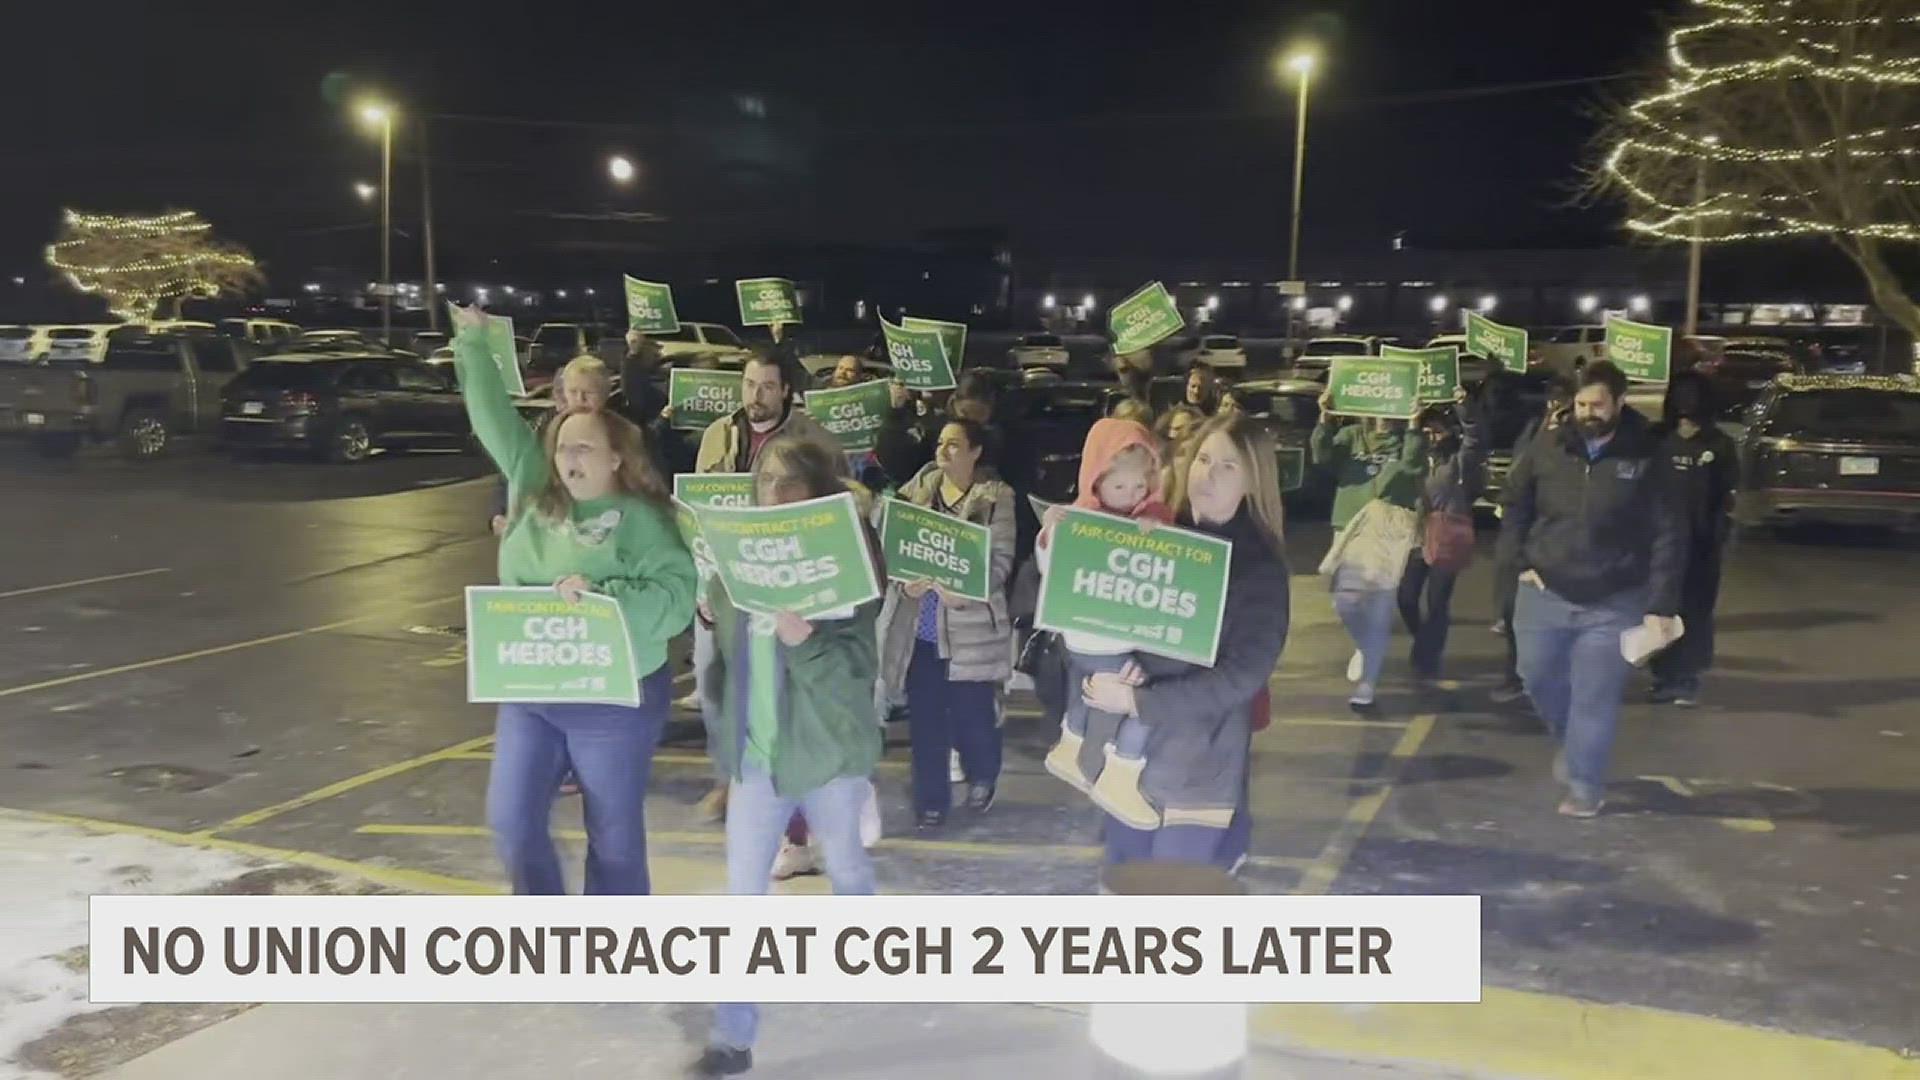 The AFSCME union blames CGH management for purposely stalling negotiations, but the hospital said that's not the case.